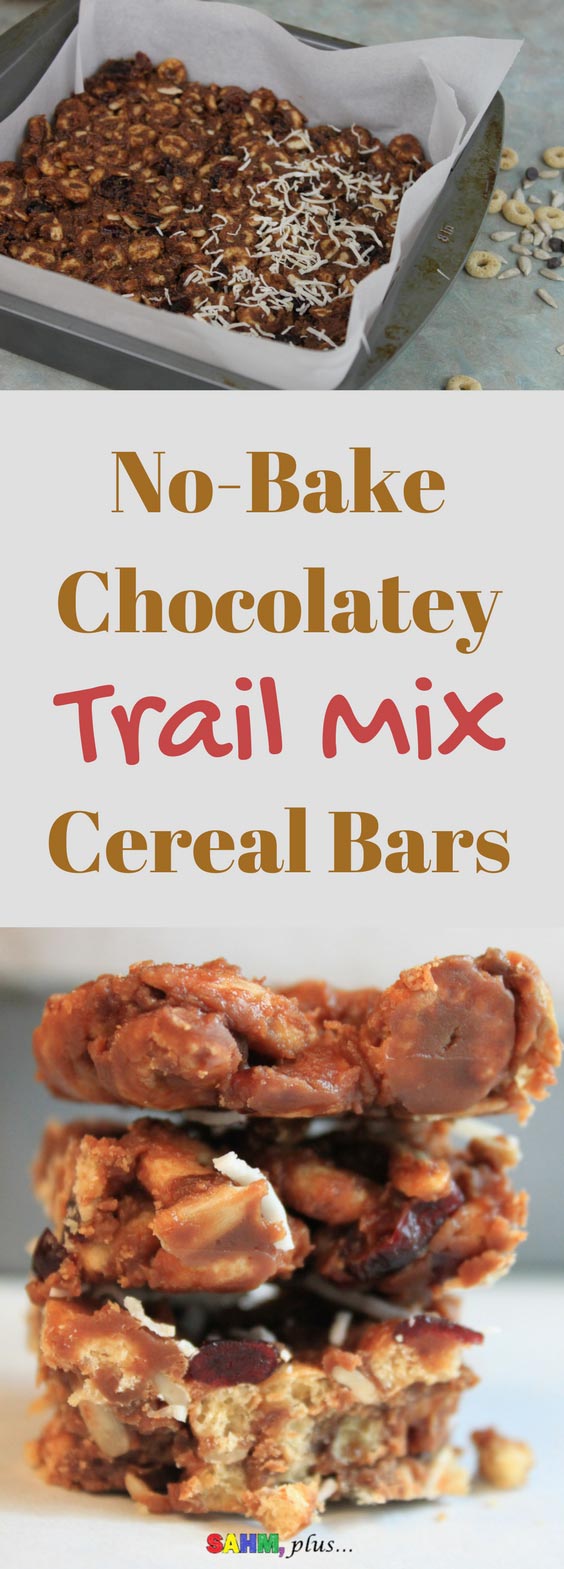 No bake chocolatey trail mix cereal bars. Made with gluten free O's cereal. And, no honey, so it's perfect for your toddler to enjoy. Gluten free dairy free trail mix cereal bars are a perfect after school treat. via www.sahmplus.com